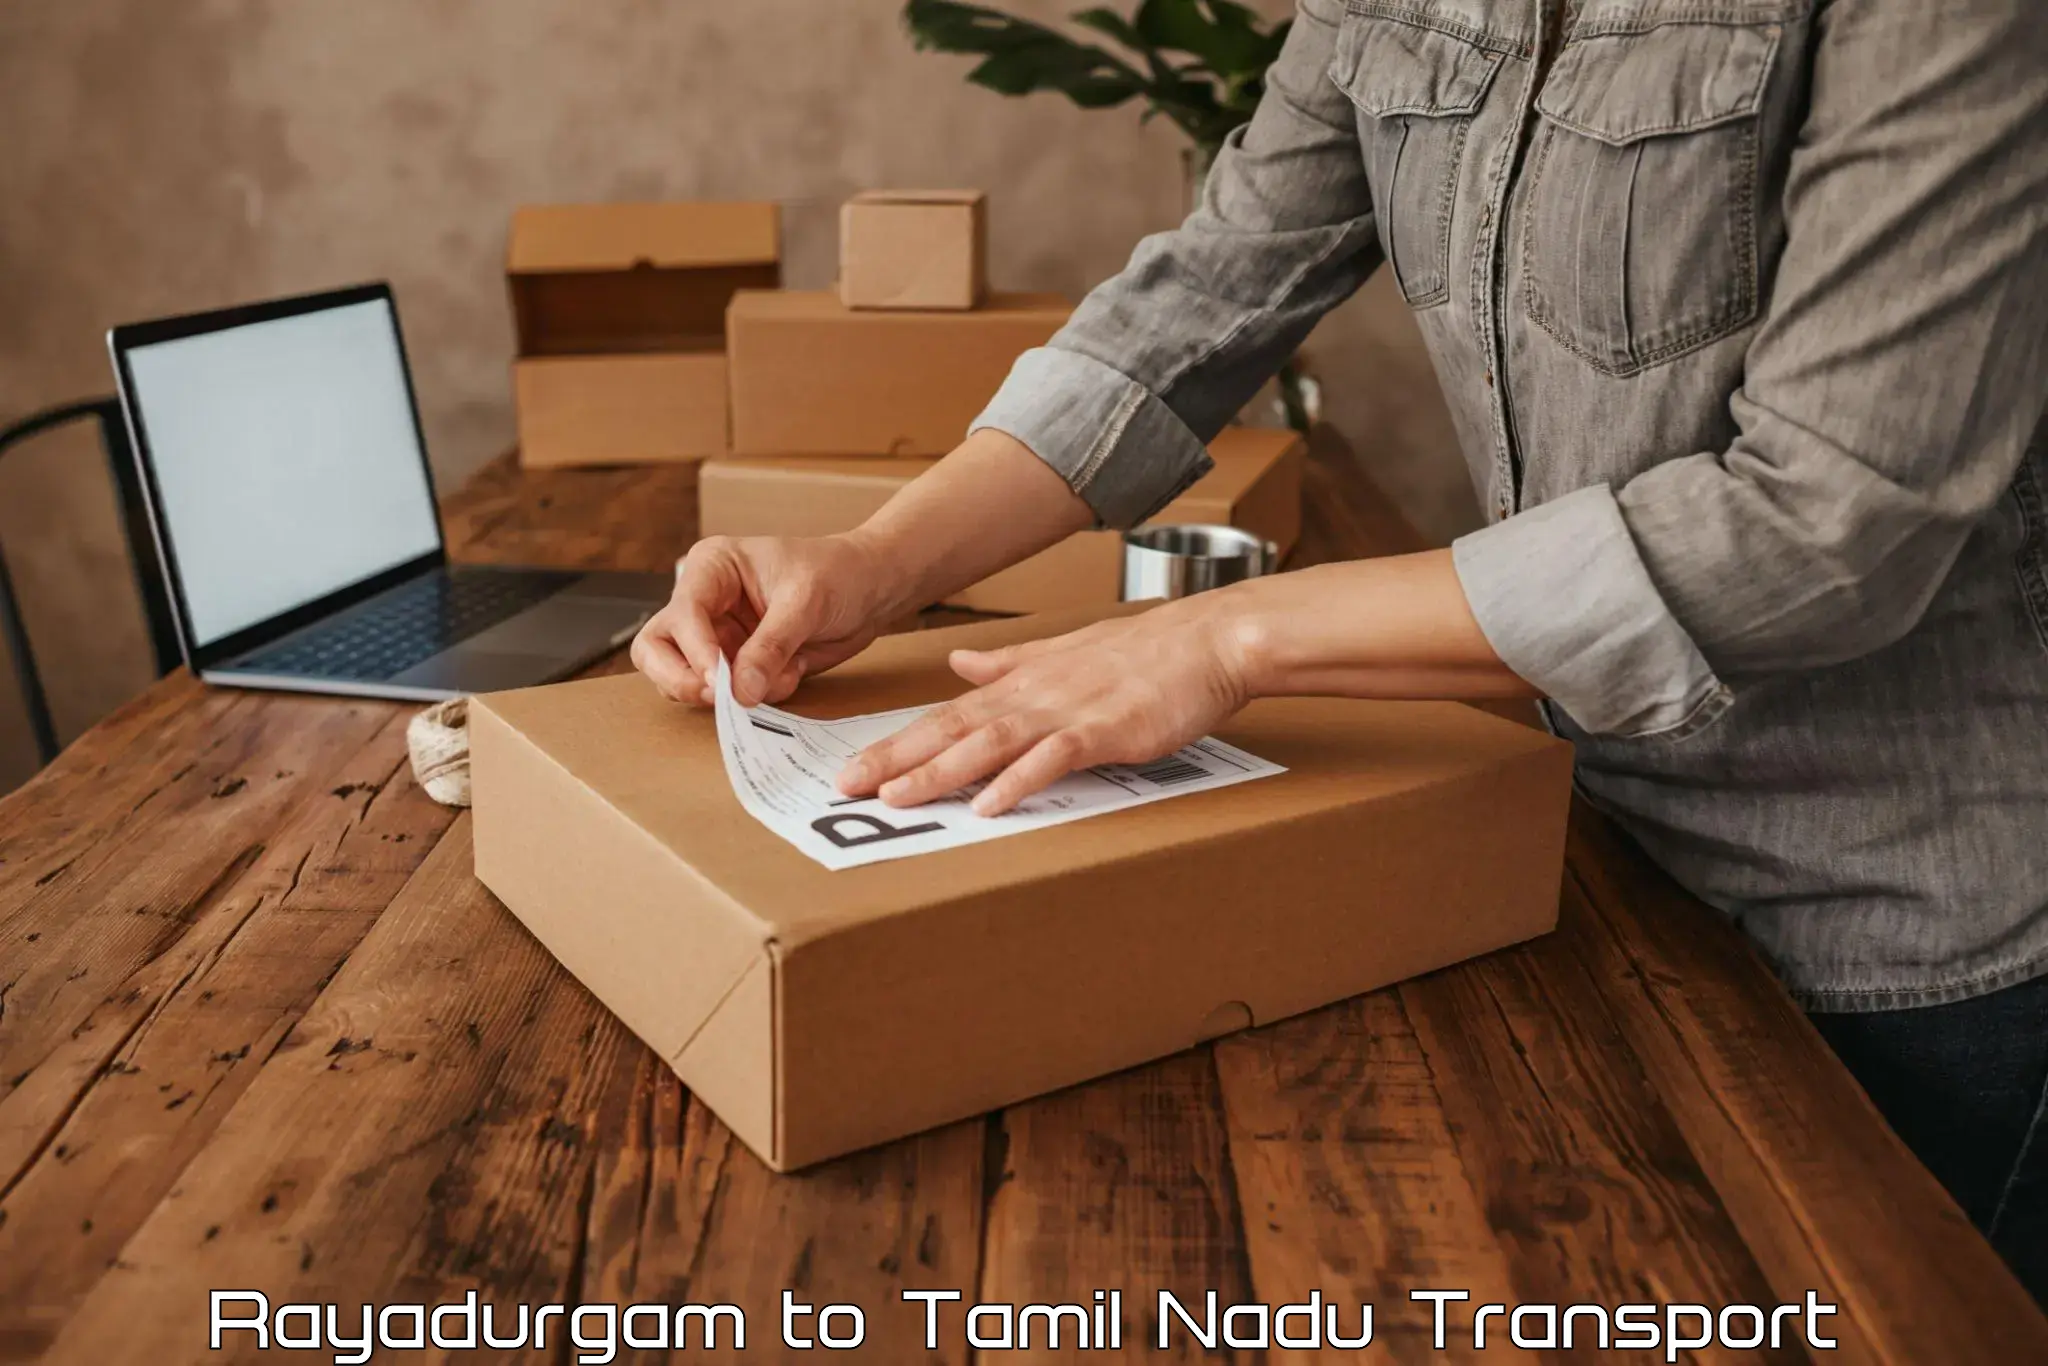 Pick up transport service Rayadurgam to SRM Institute of Science and Technology Chennai